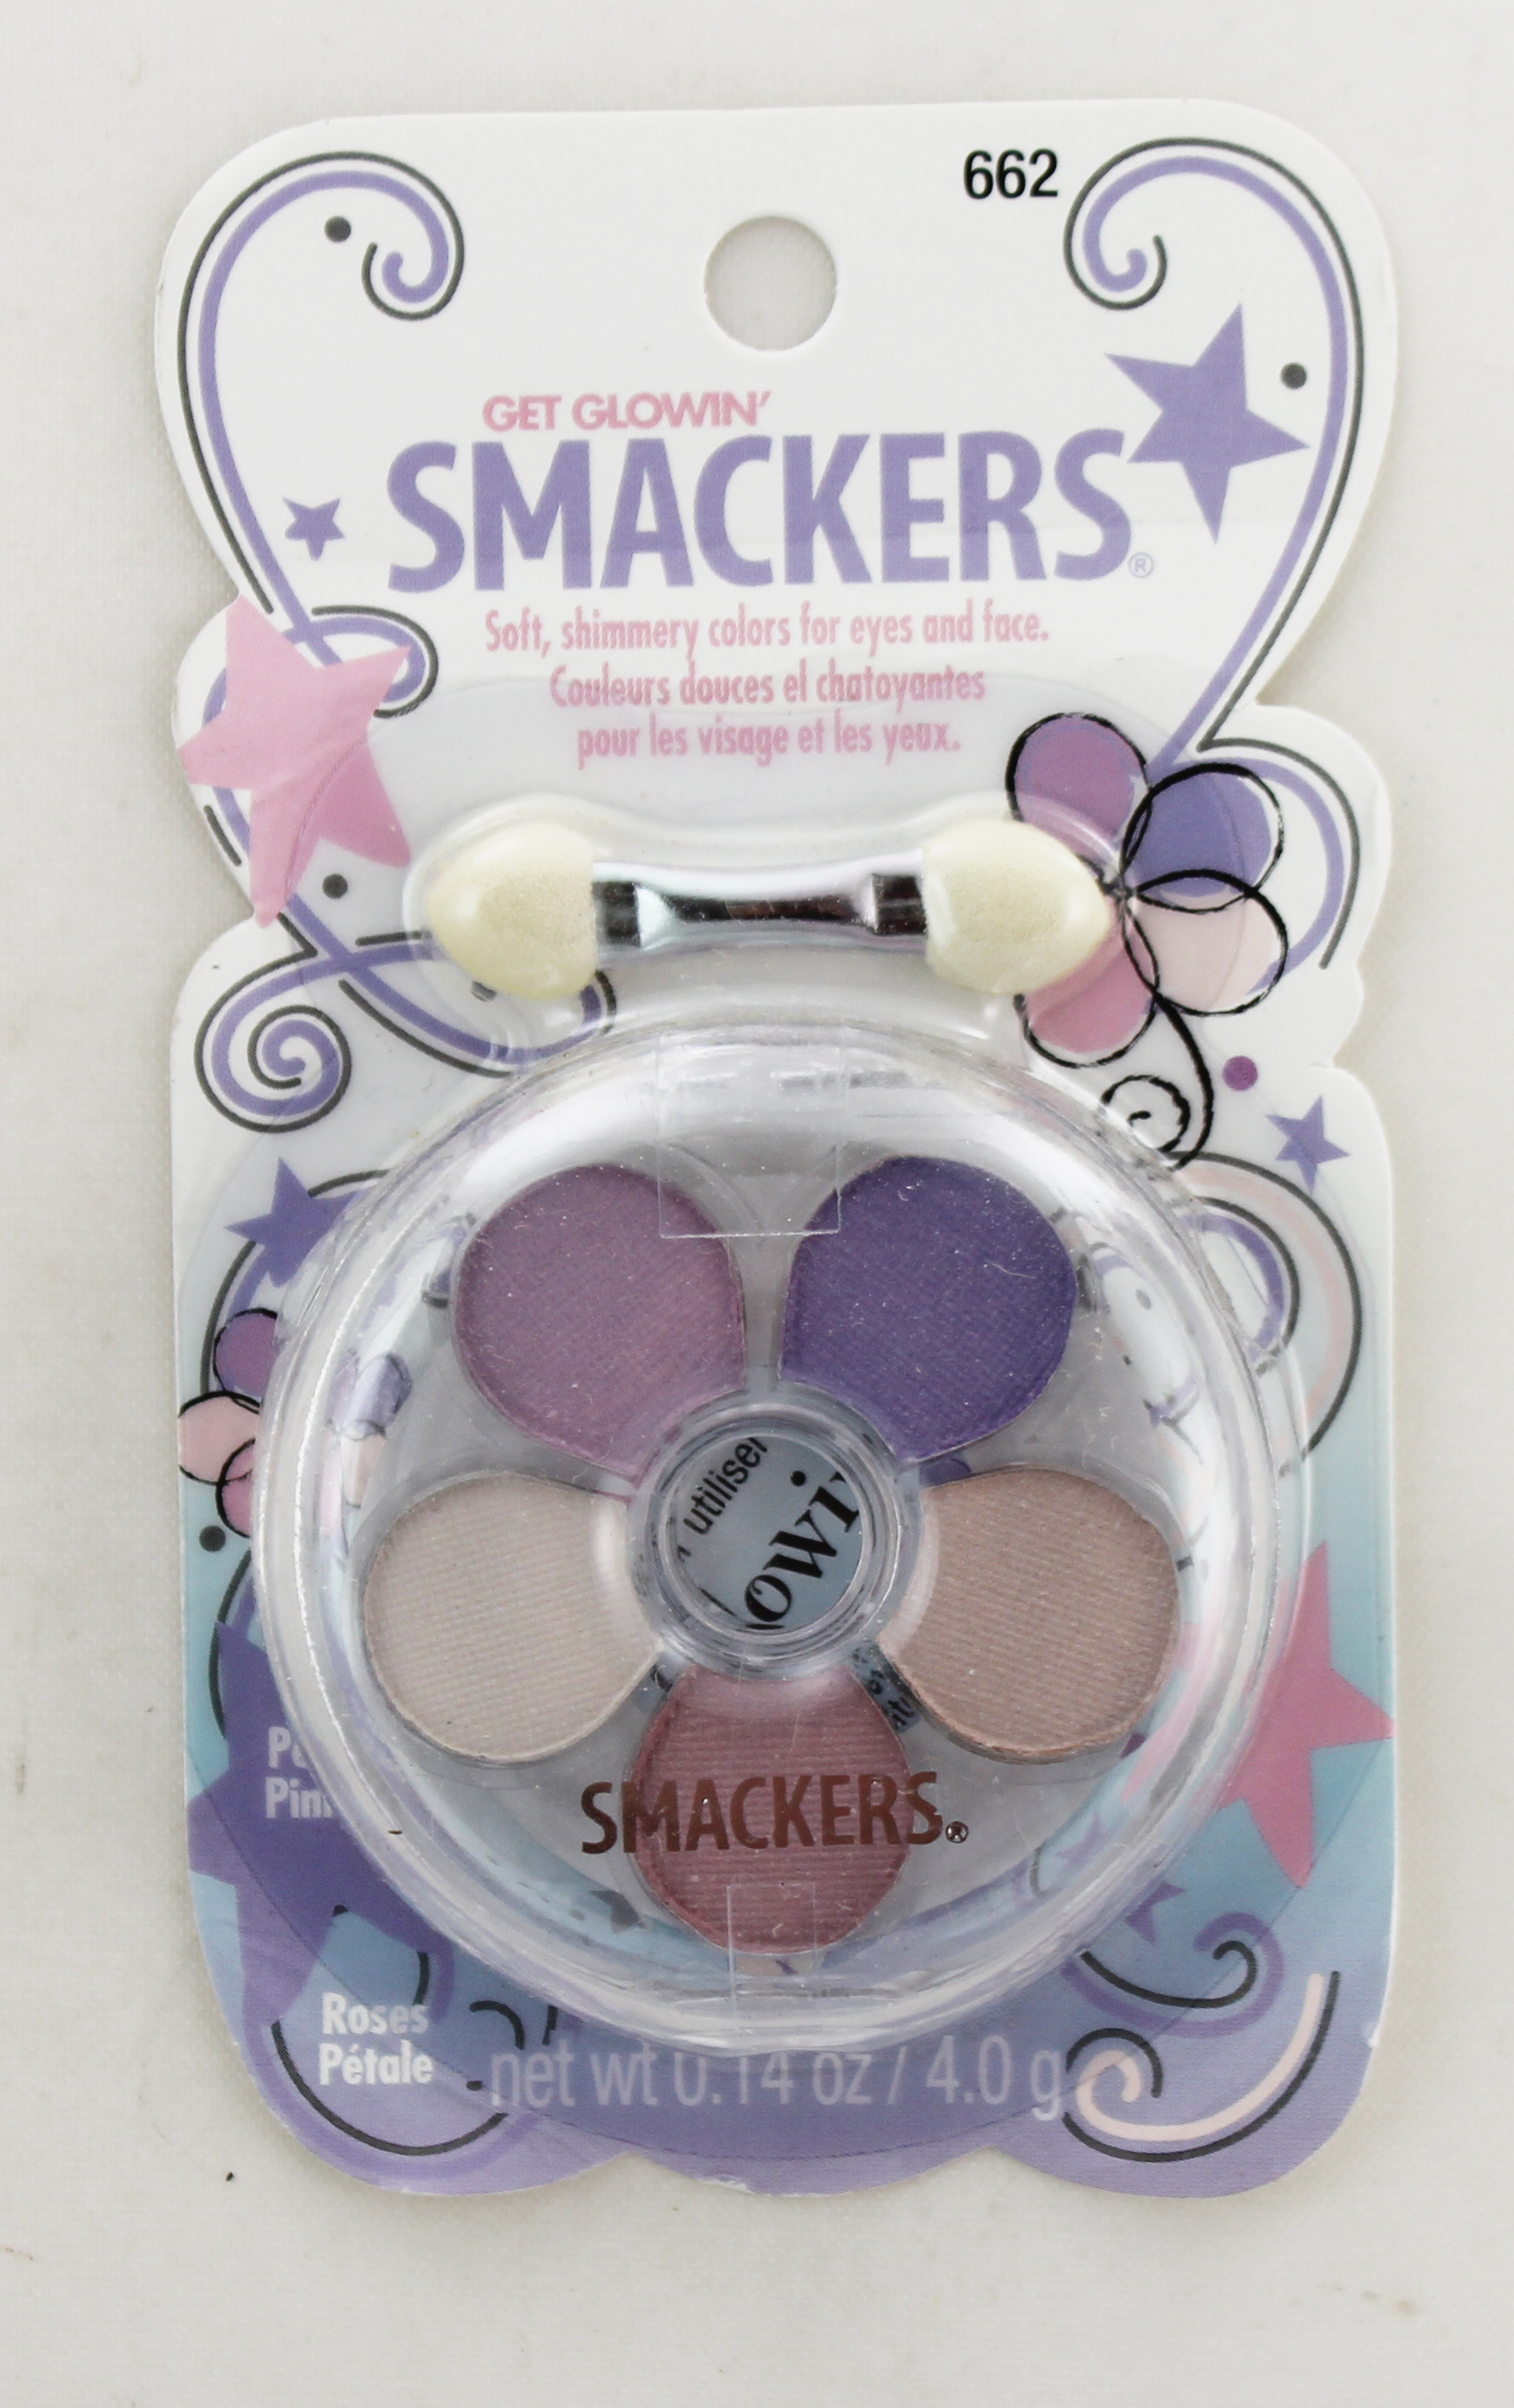 Get Glowin Smackers By Bonne Bell. Soft Shimmery colors for eyes and face